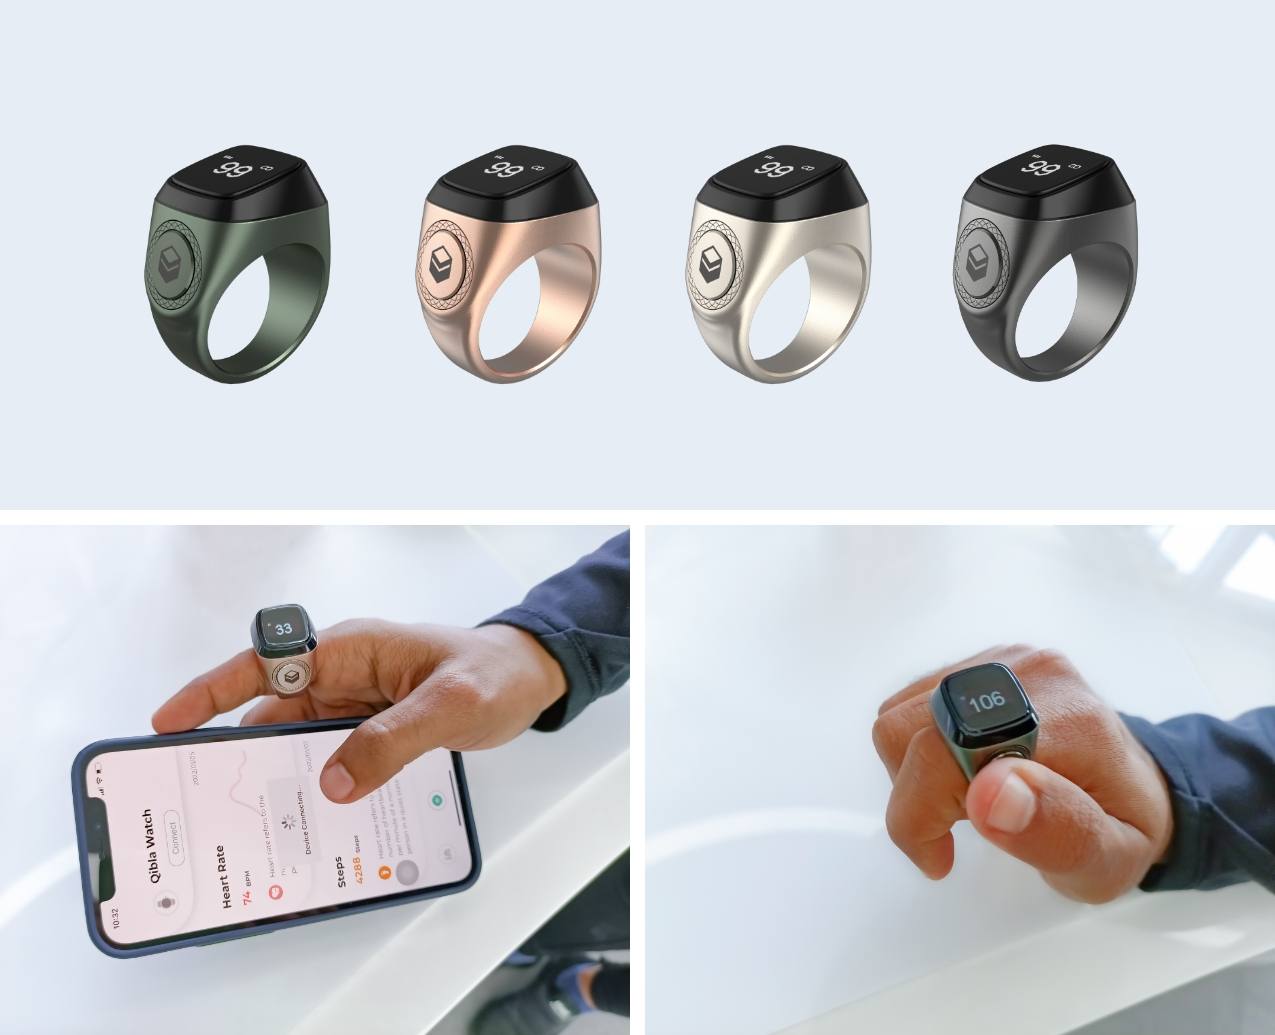 With 5 Prayer Time Reminders via smartphone app, the iQibla Zikr1 Smart Ring Assists Muslims in praying